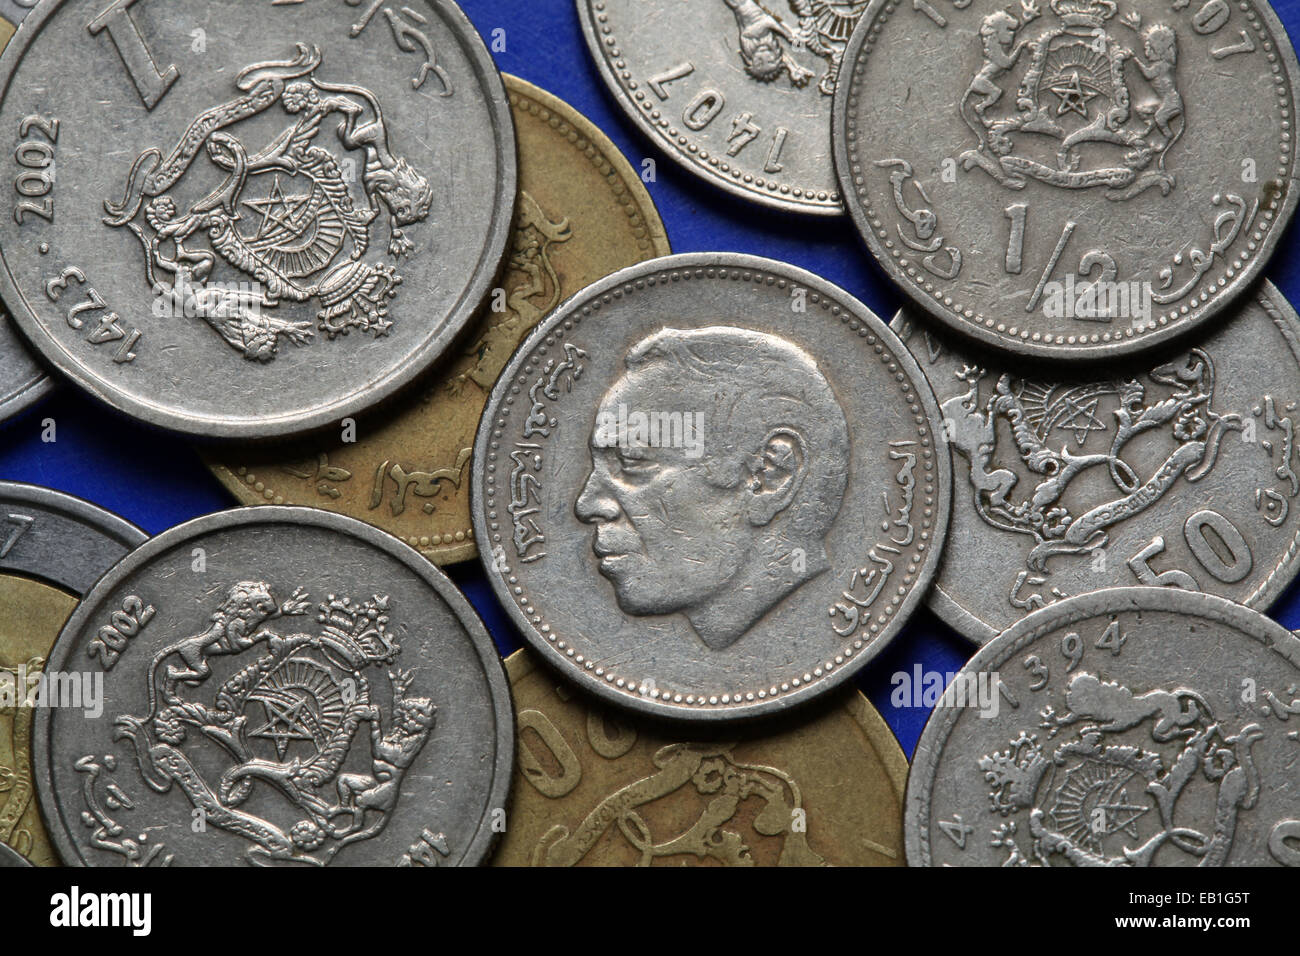 Coins of Morocco. King Hassan II of Morocco depicted in the Moroccan dirham coins. Stock Photo